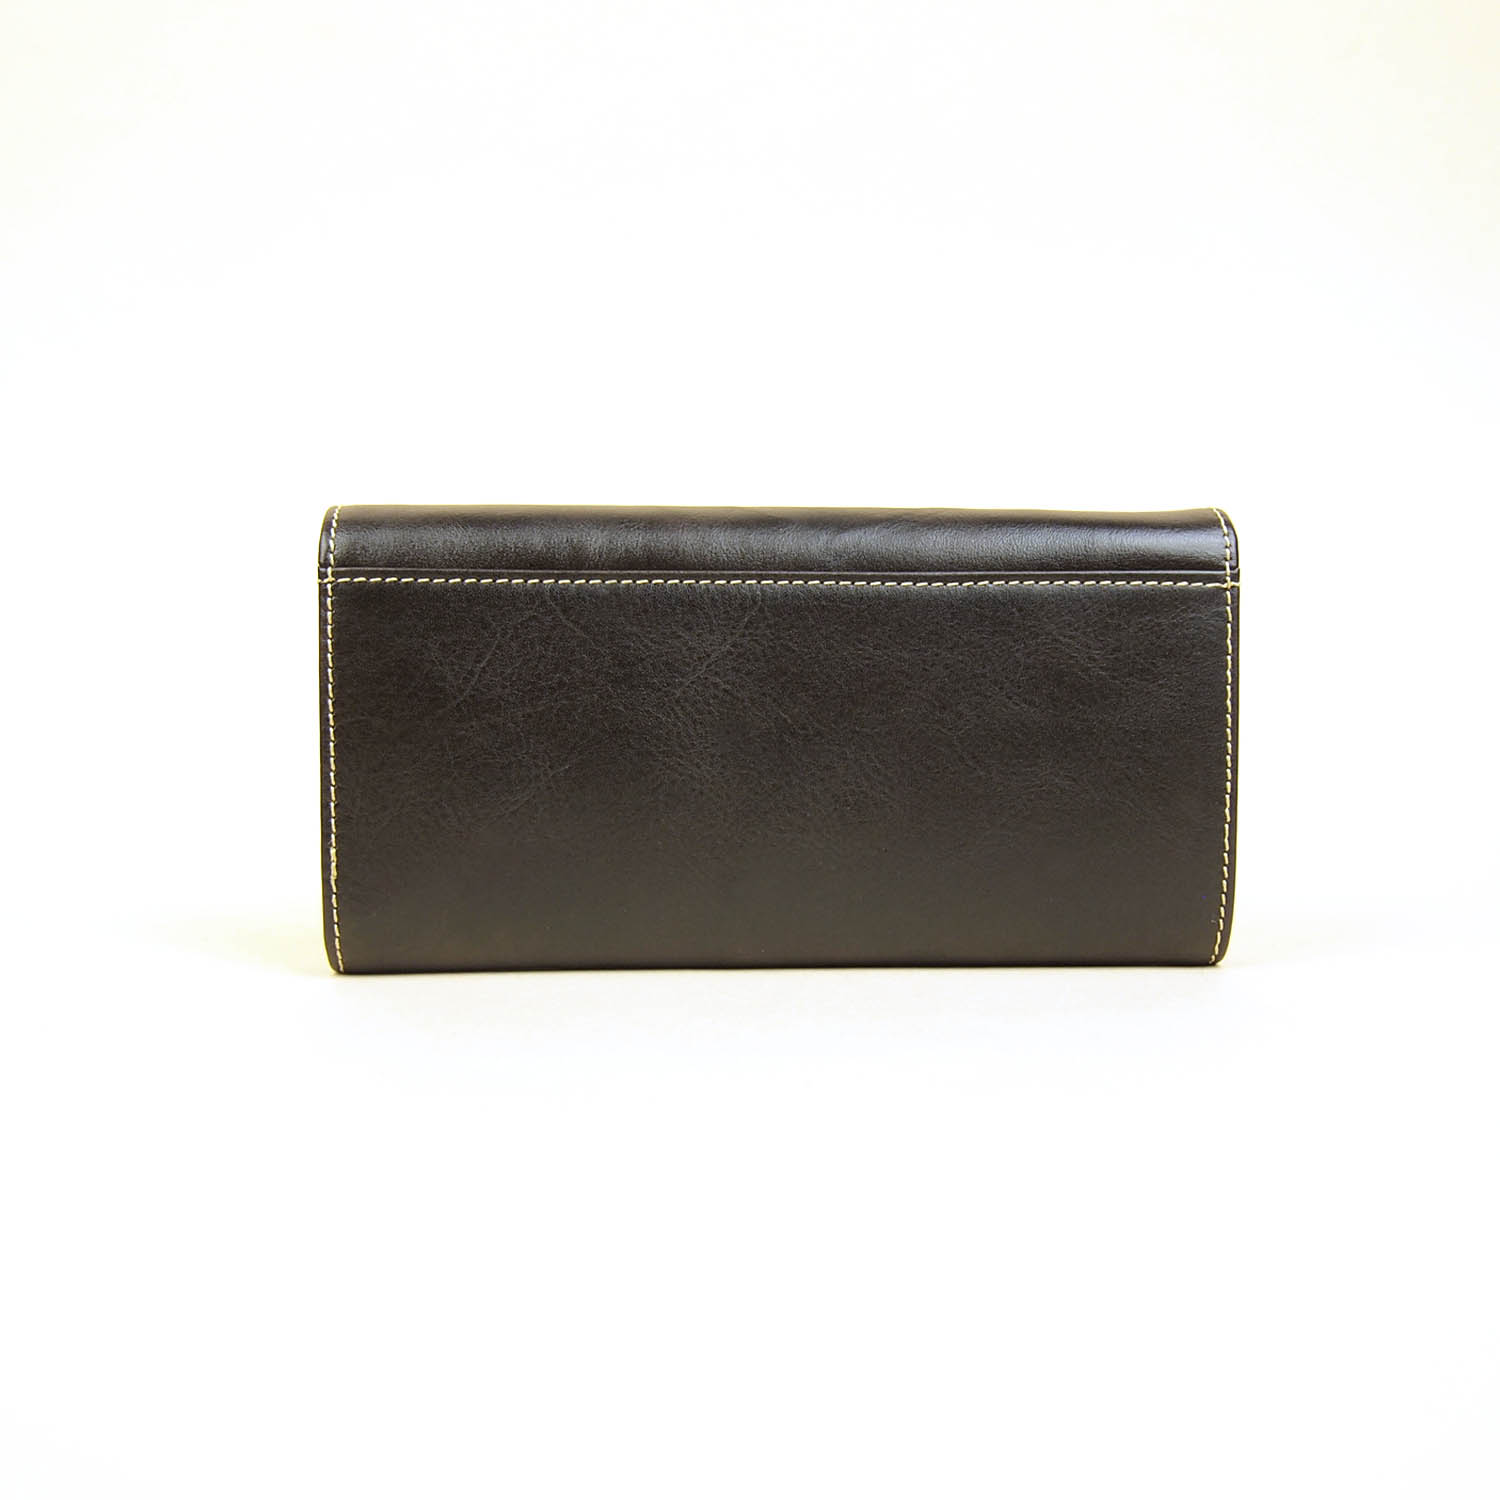 Butterfield Veata Wallet Front View